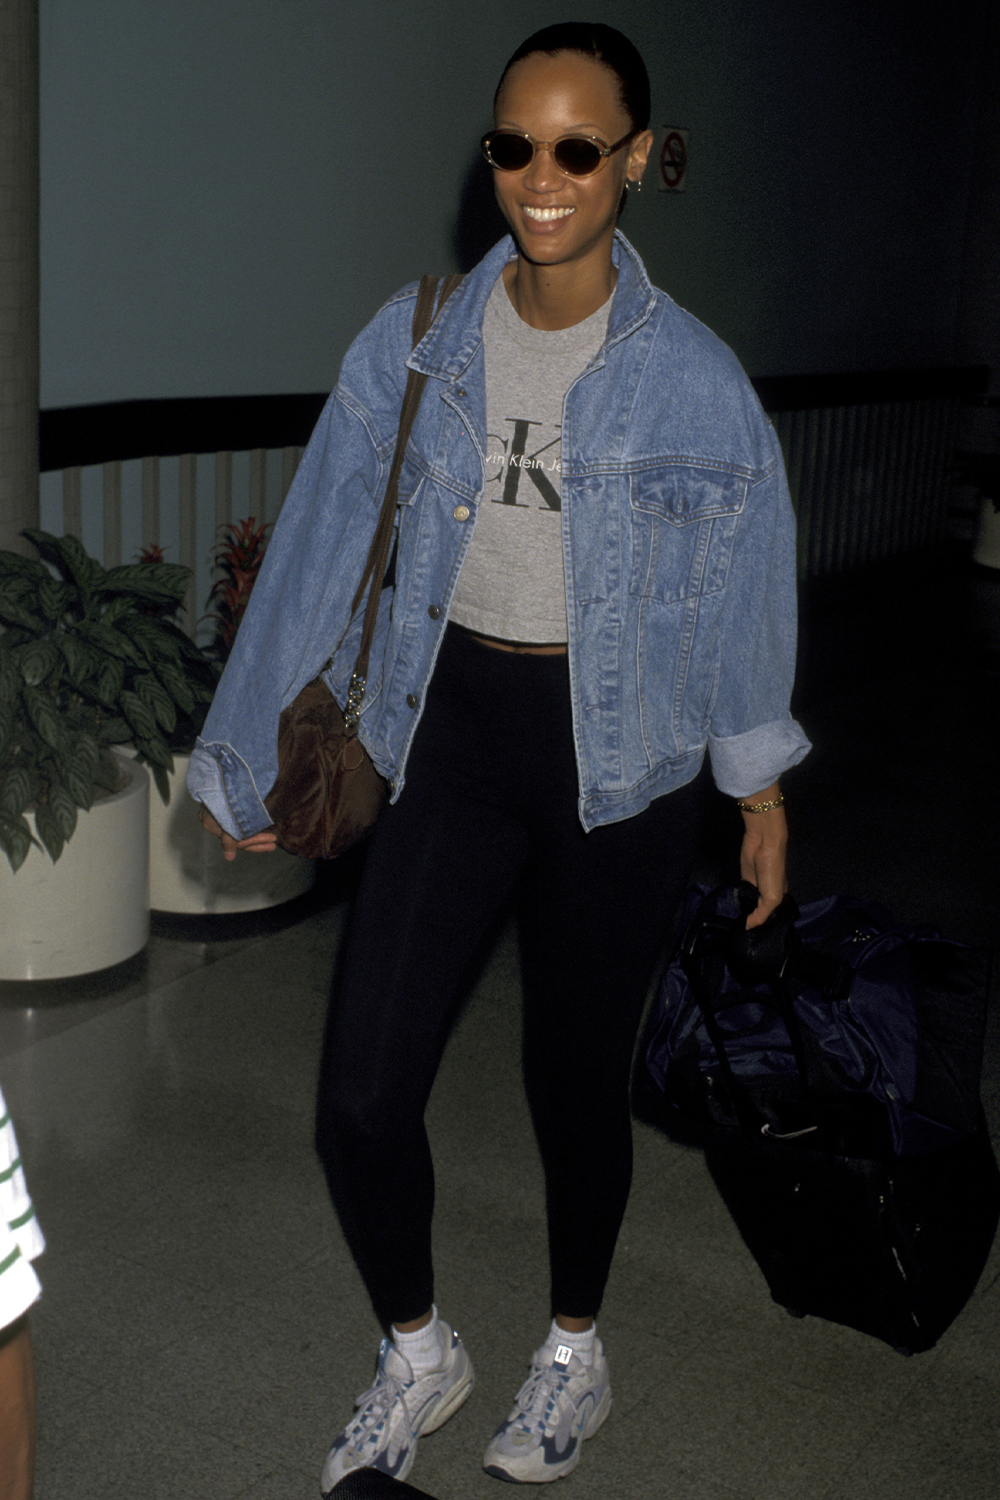 Easy 90s Outfits: Tyra Banks in a denim jacket and leggings